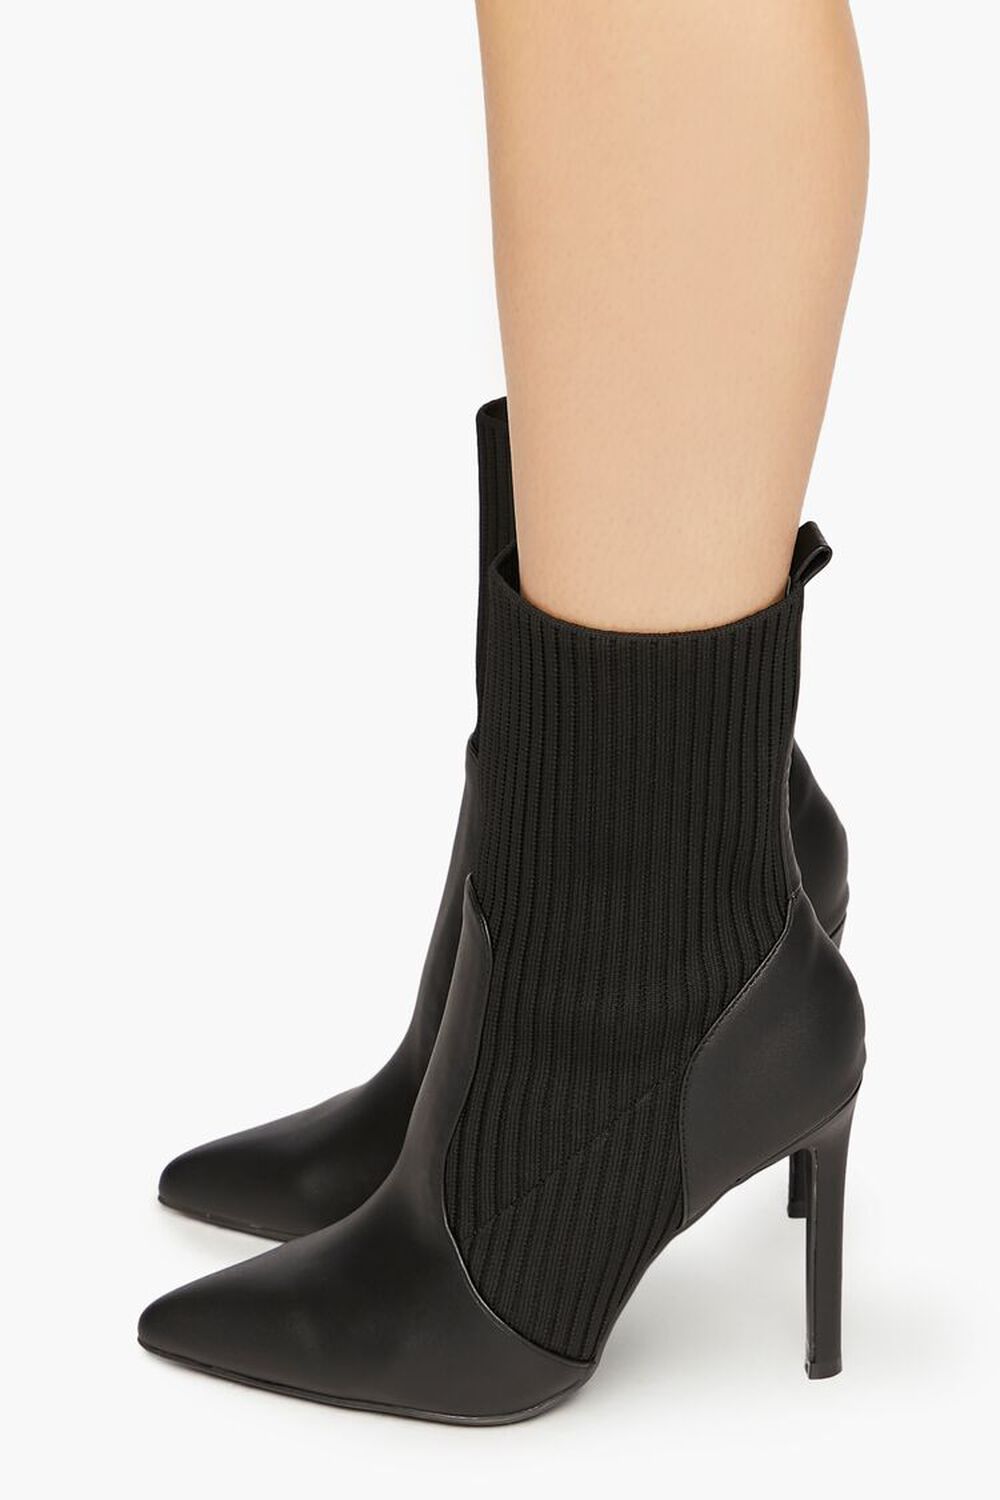 BLACK Faux Leather-Trim Sock Booties, image 2